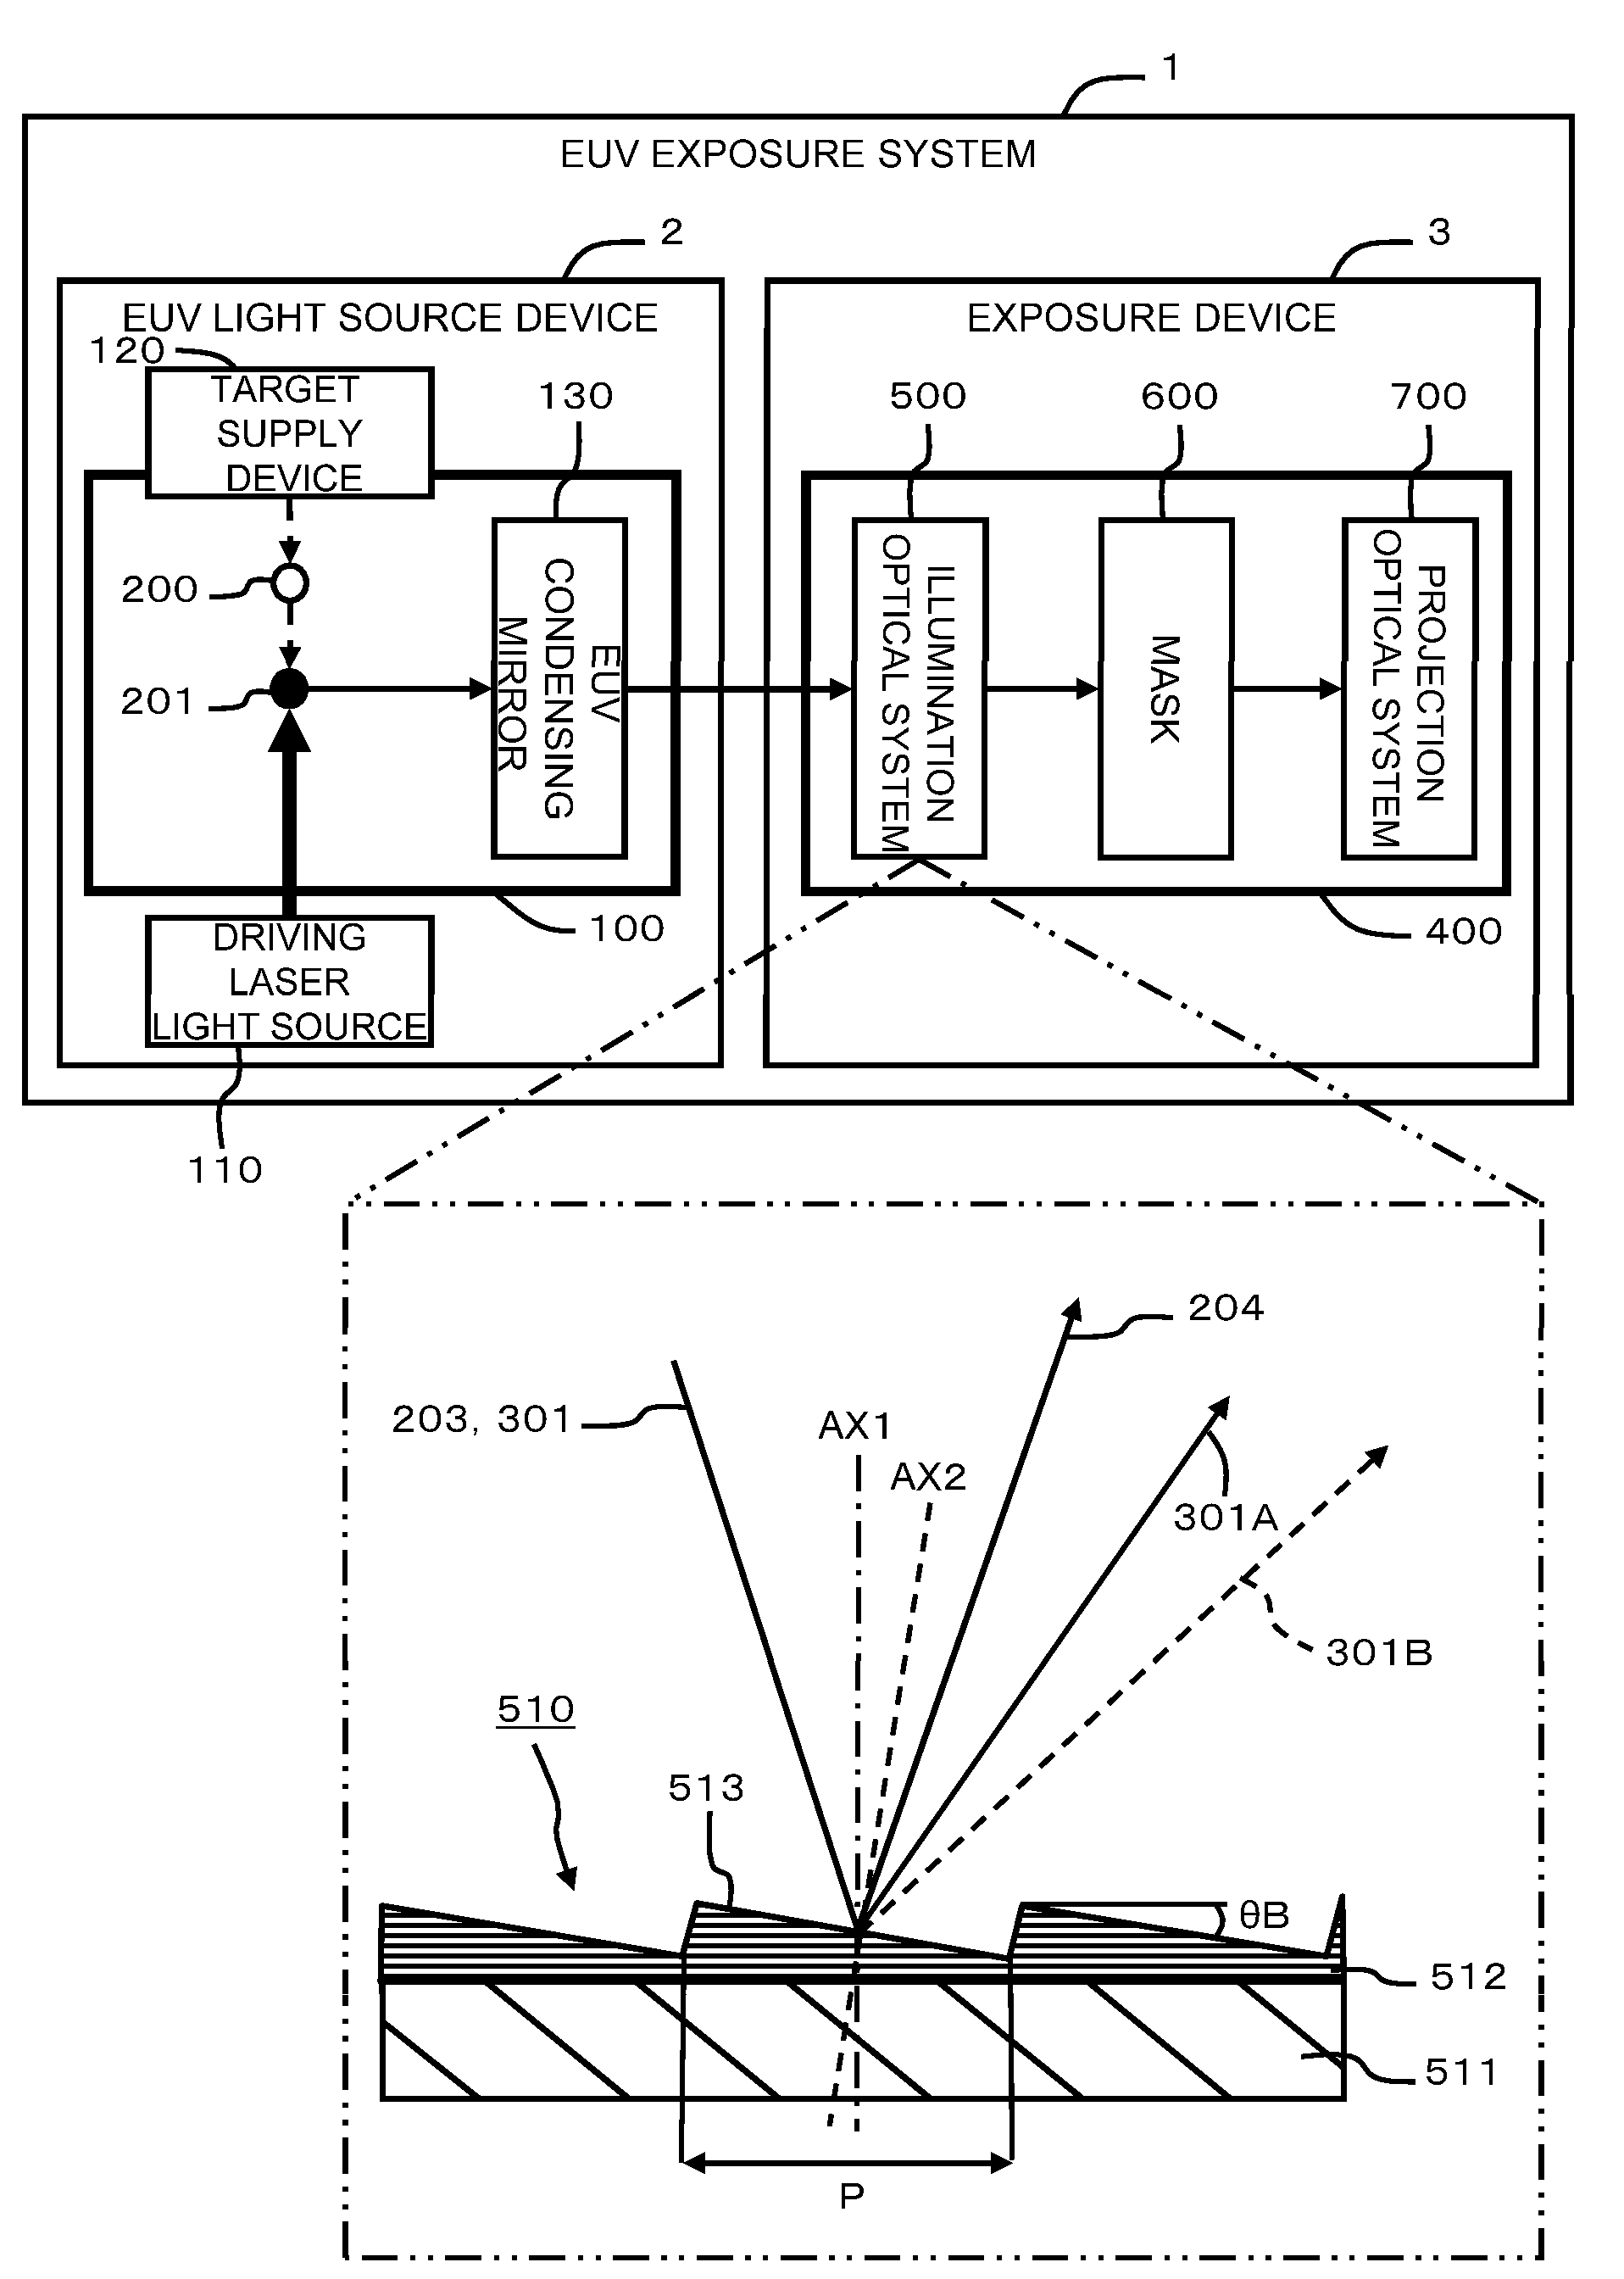 Semiconductor exposure device using extreme ultra violet radiation